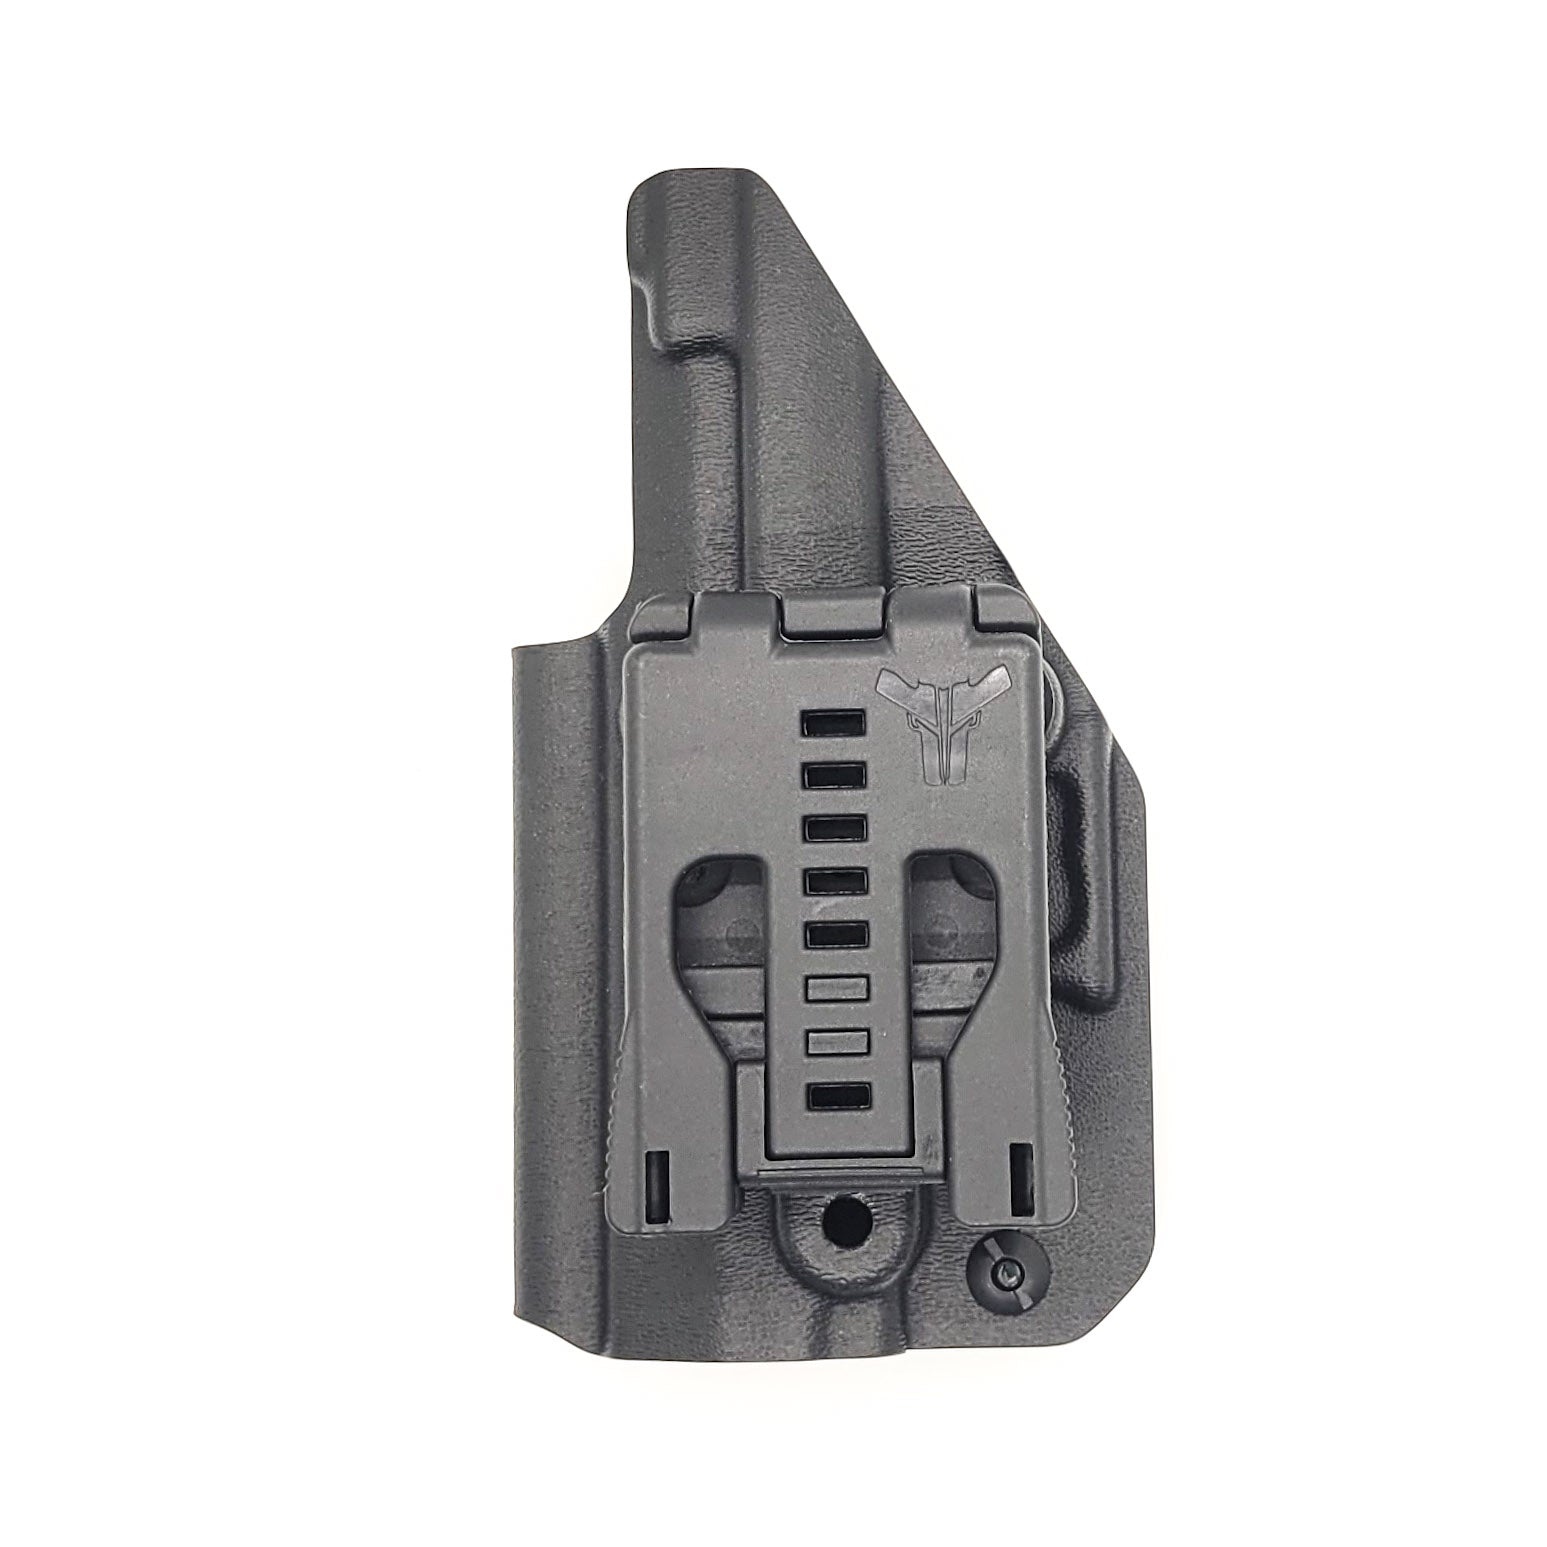 For the best Outside Waistband Kydex Holster designed to fit the Walther P22 22 Long Rifle Pistol, look to Four Brothers. Full sweat guard, adjustable retention, minimal material, & smooth edges to reduce printing. Proudly made in the USA by veterans and law enforcement.